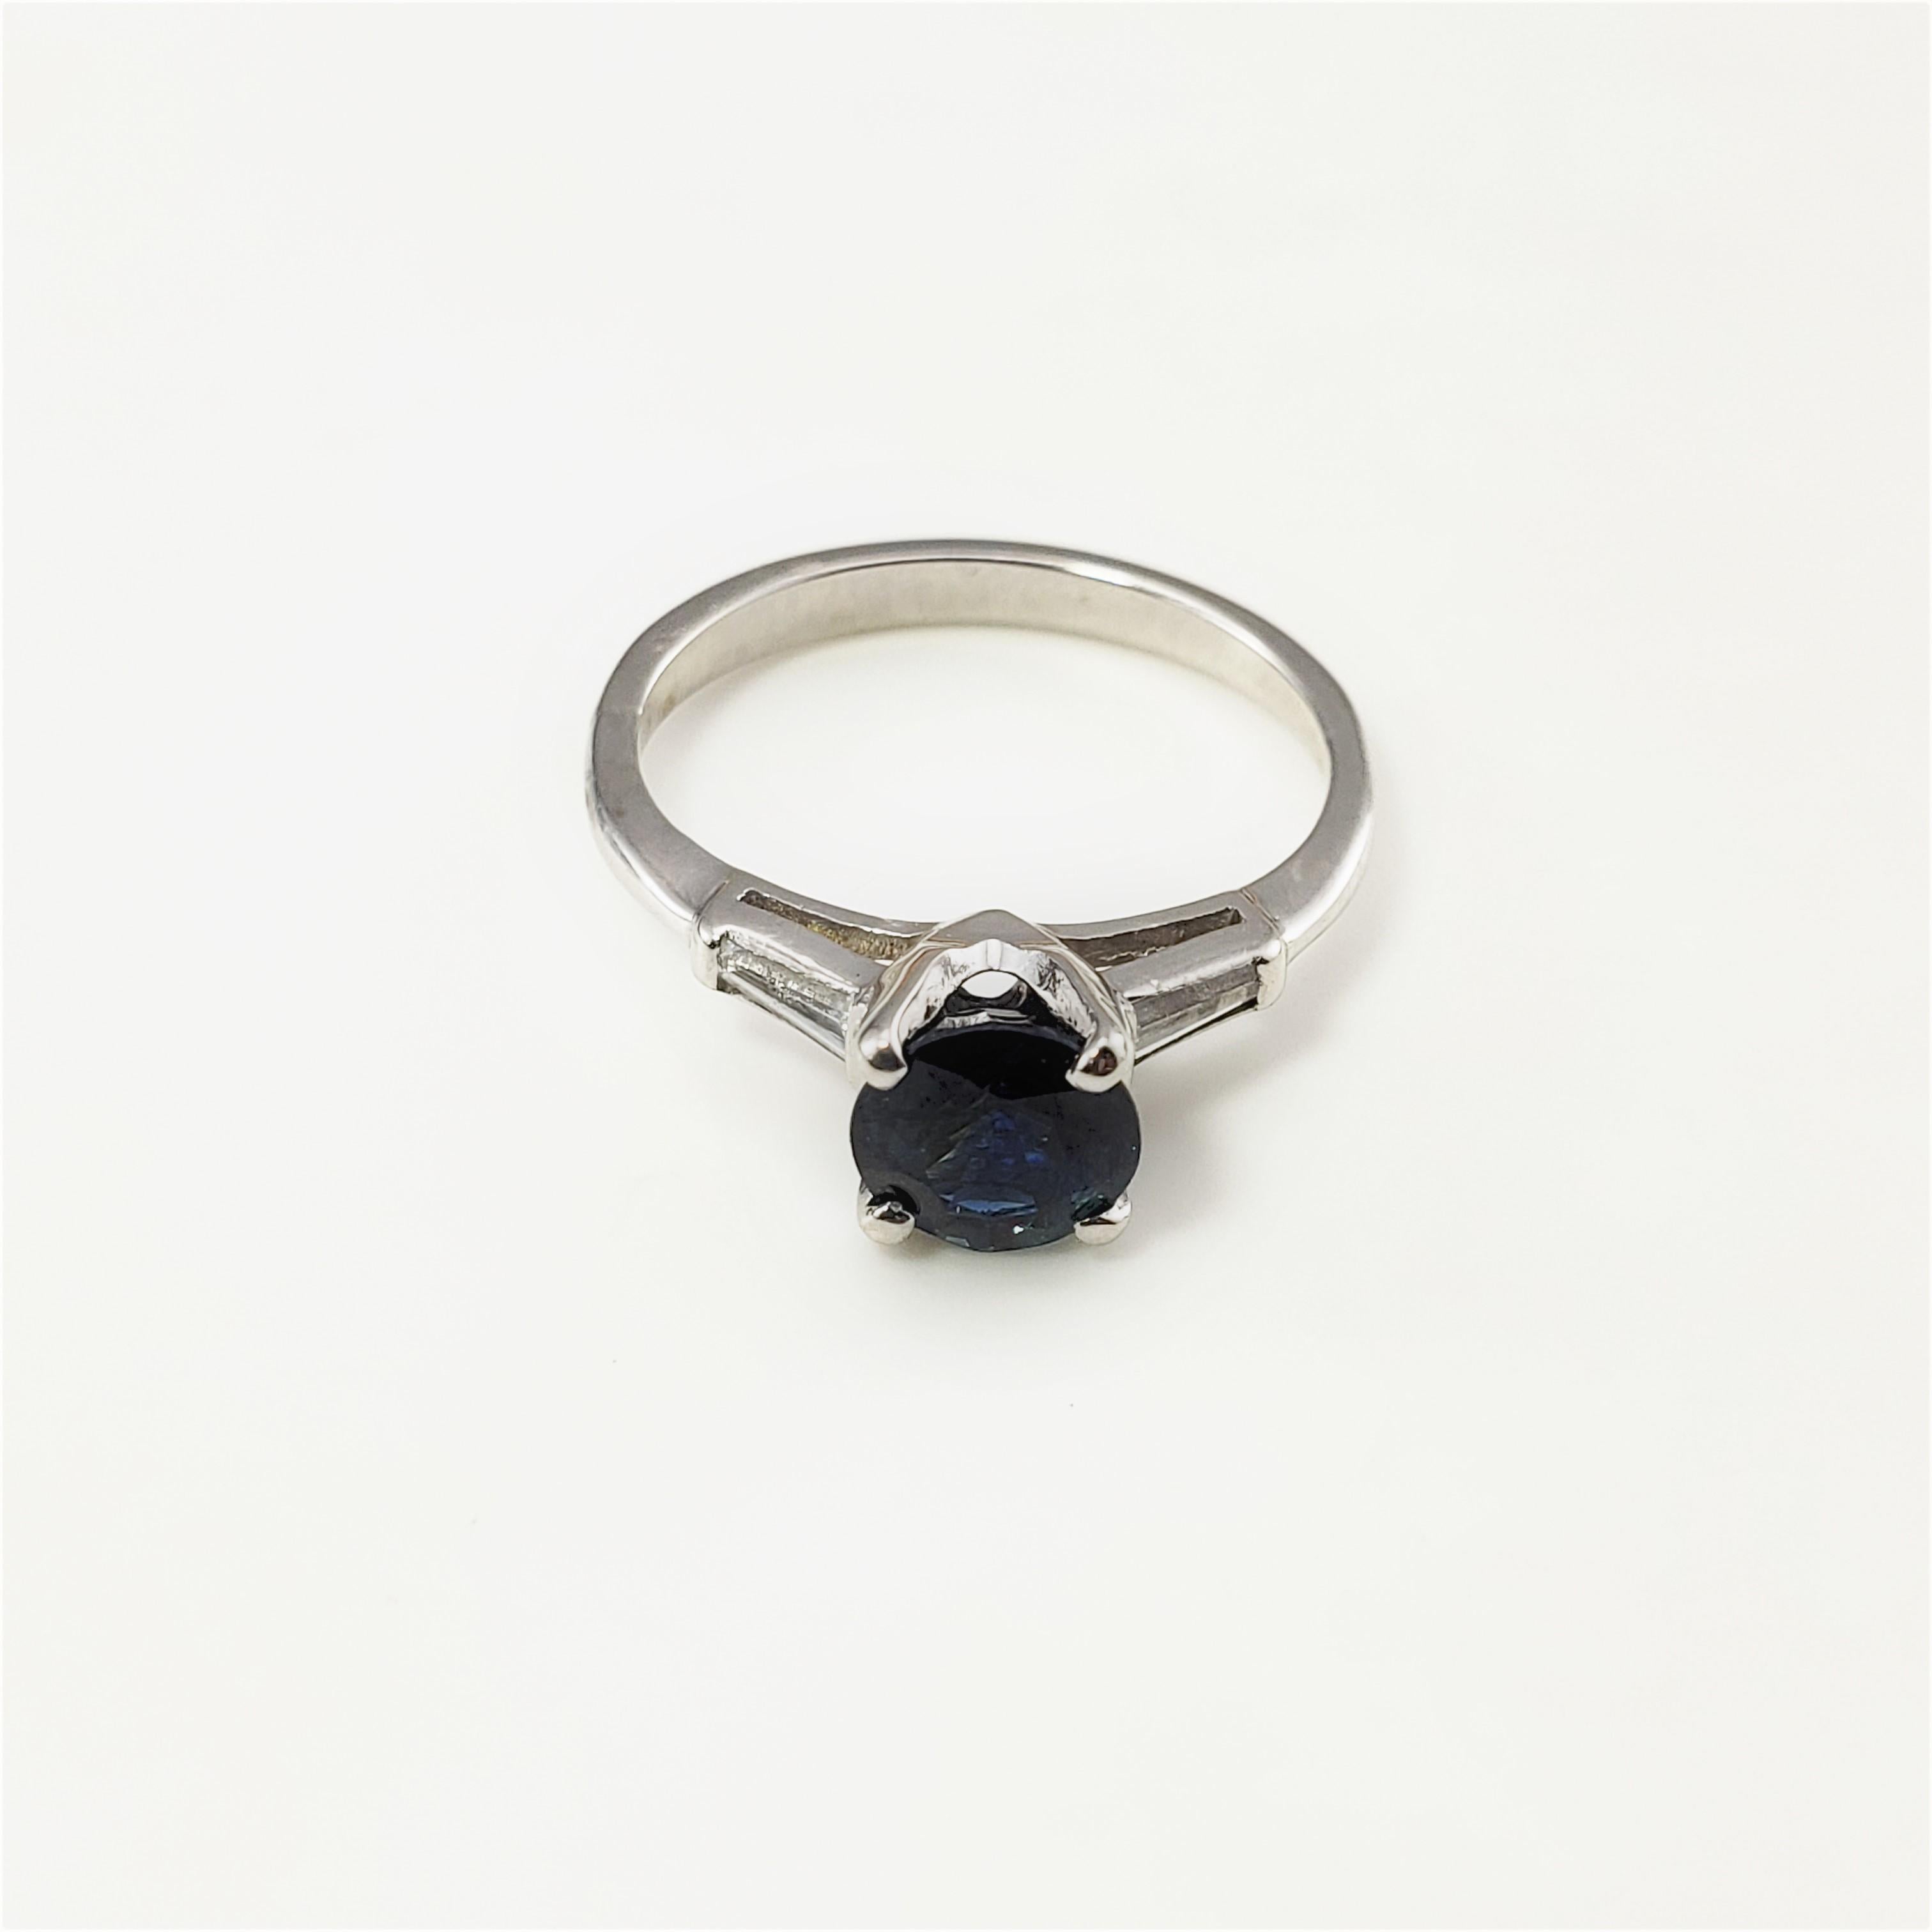 14 Karat White Gold Sapphire and Diamond Ring Size 6.5 GAI Certified-

This lovely ring features one round sapphire (6 mm) and two baguette diamond set in classic 14K white gold.  Shank: 2 mm.

Sapphire weight:  1.31 ct.

Total diamond weight:  .08